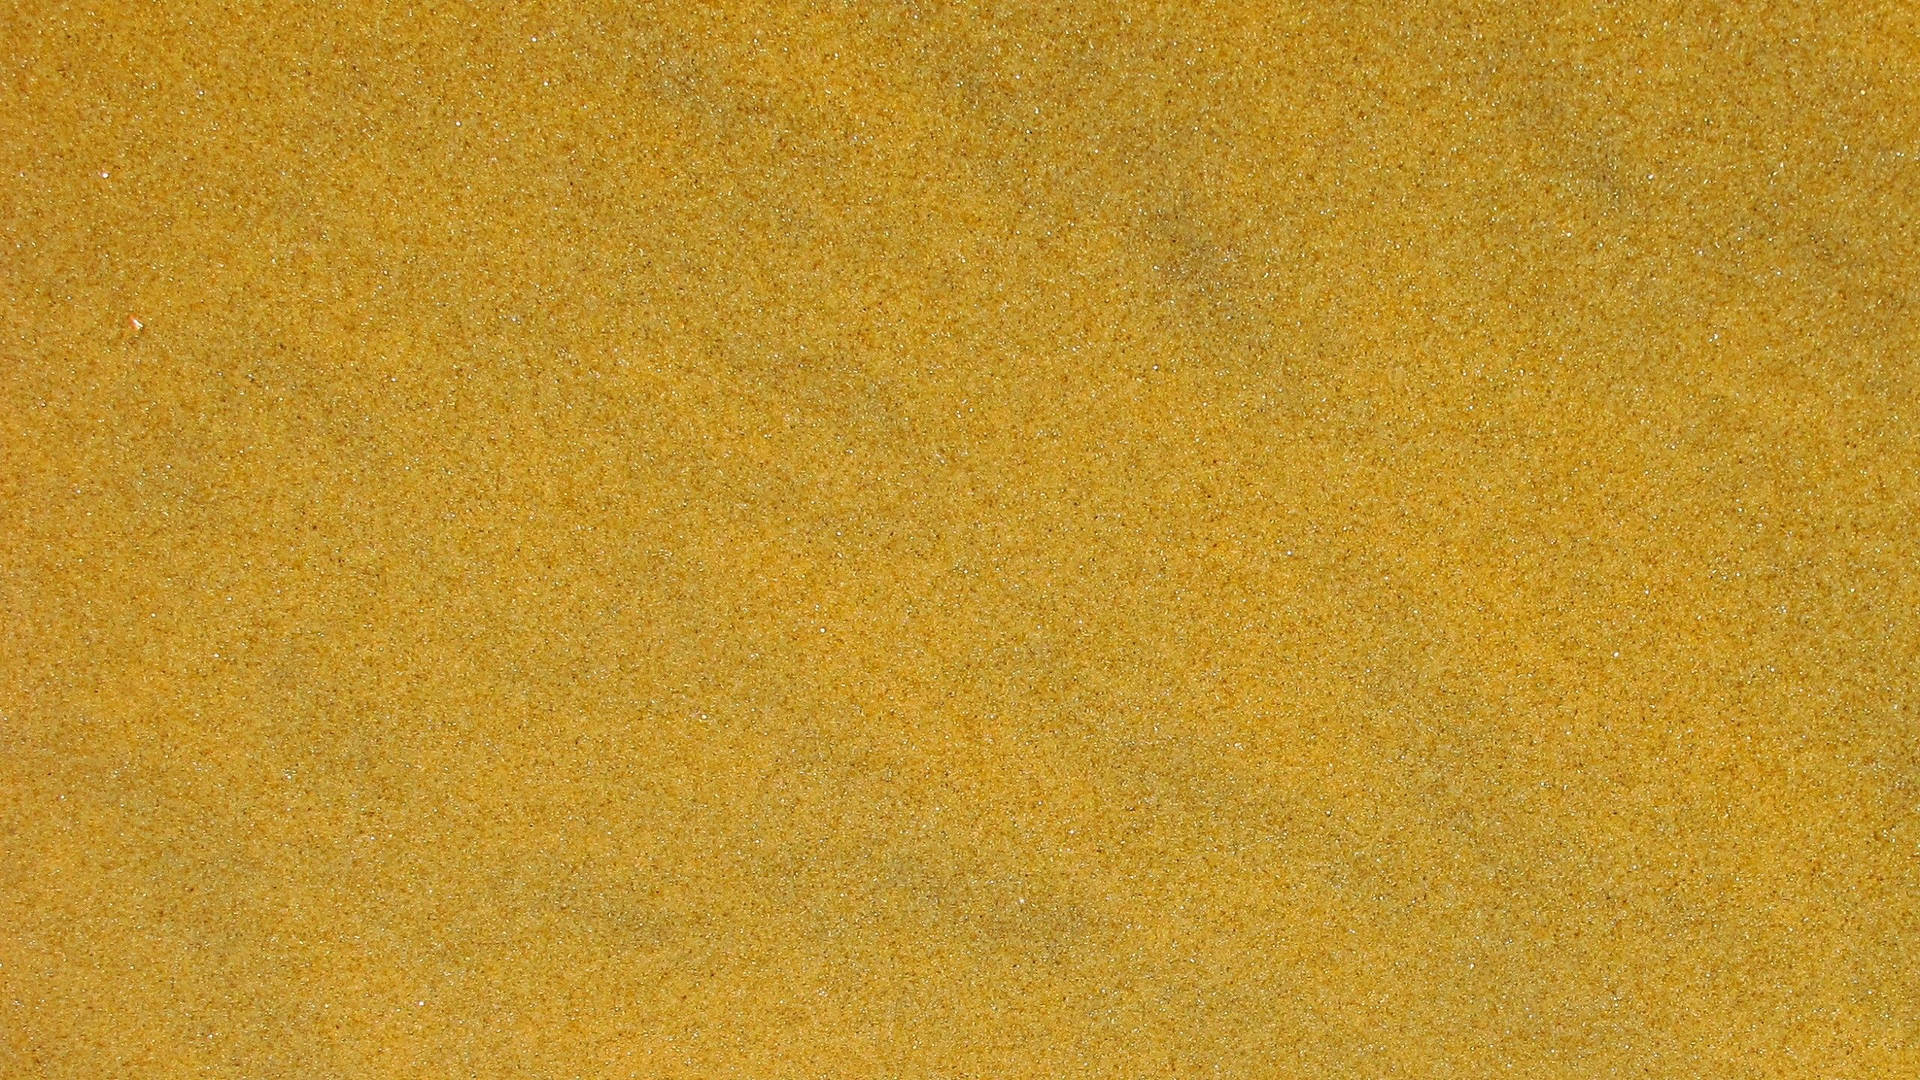 Gold 2560X1440 Wallpaper and Background Image